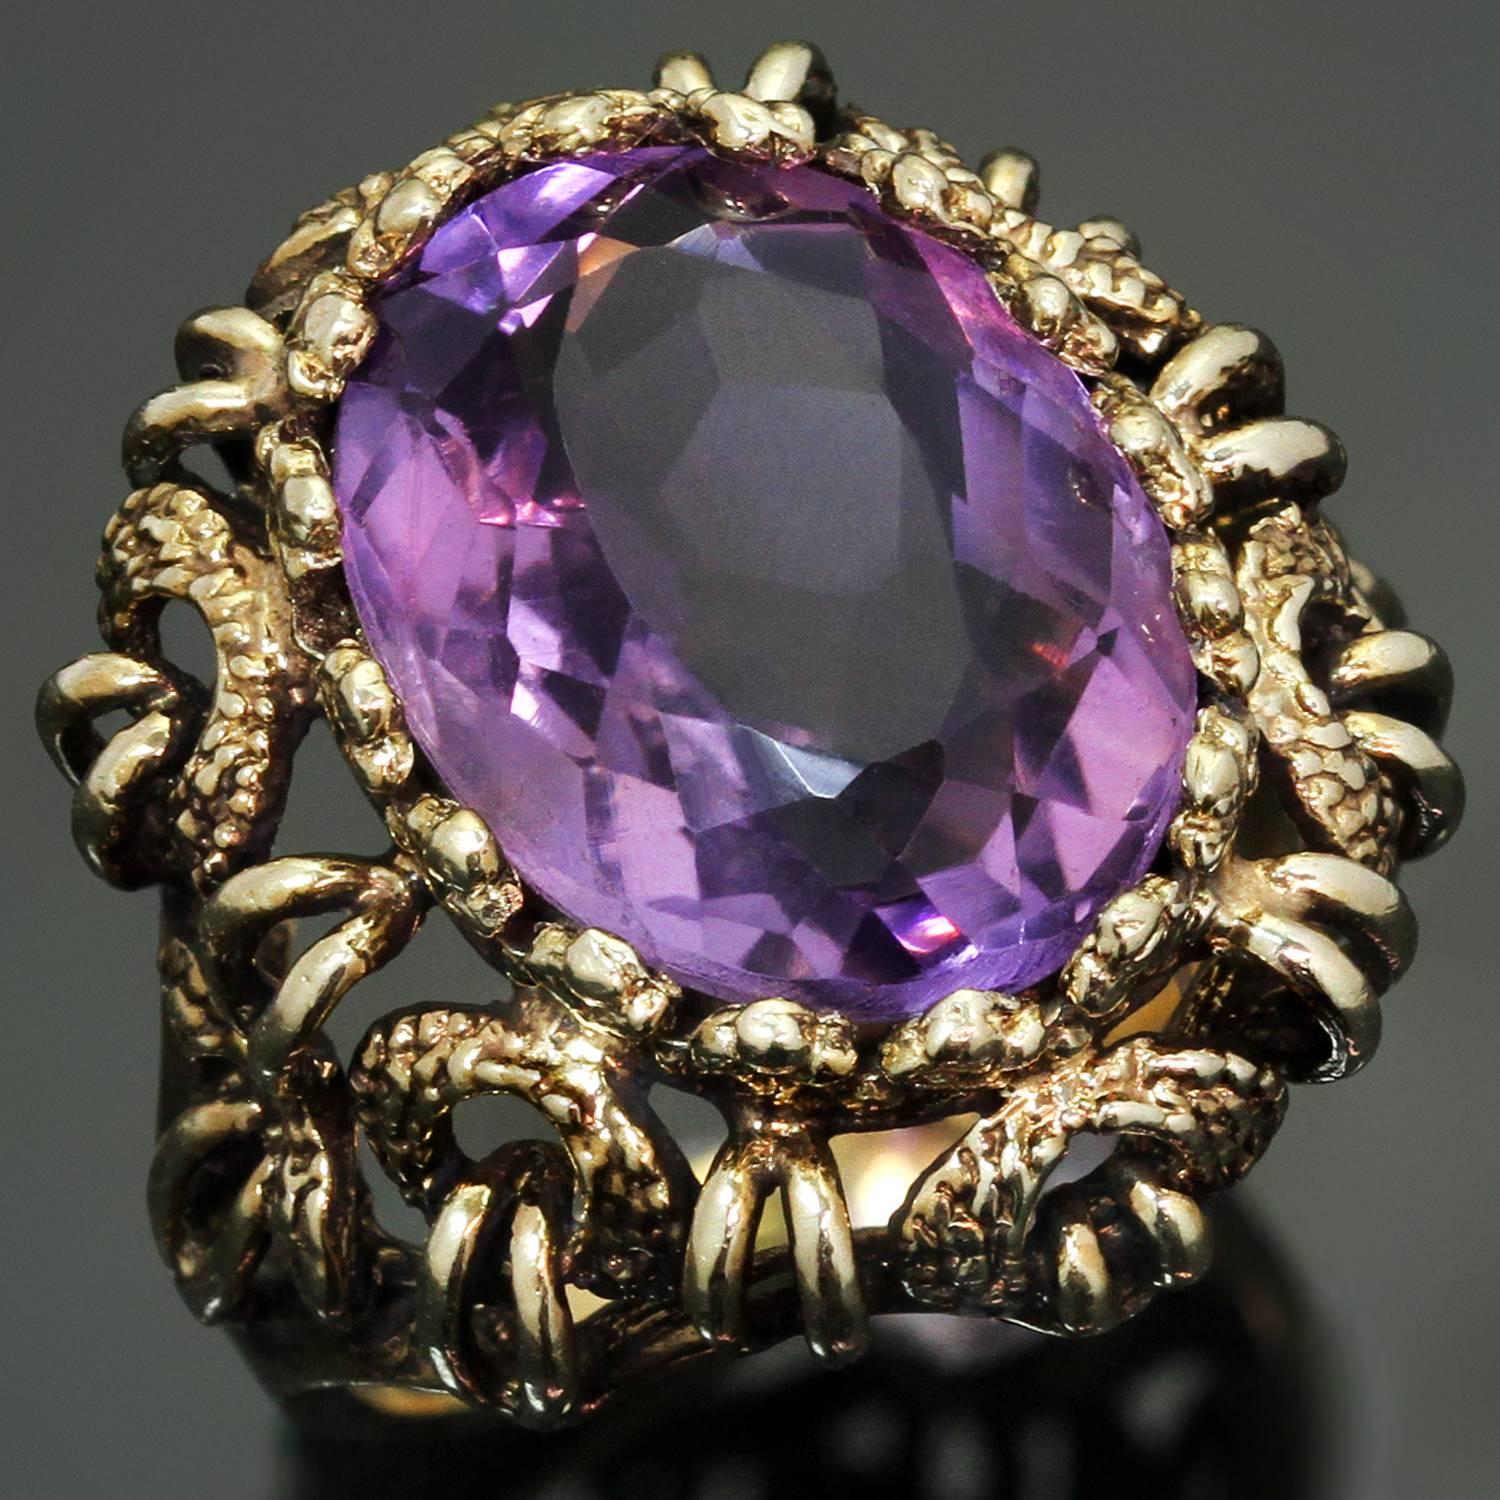 This fabulous vintage cocktail ring is beautifully hand-crafted in 14k multi-textured yellow gold and is beautifully set with a faceted oval natural amethyst stone. Made in United States circa 1970s. Measurements: 0.70